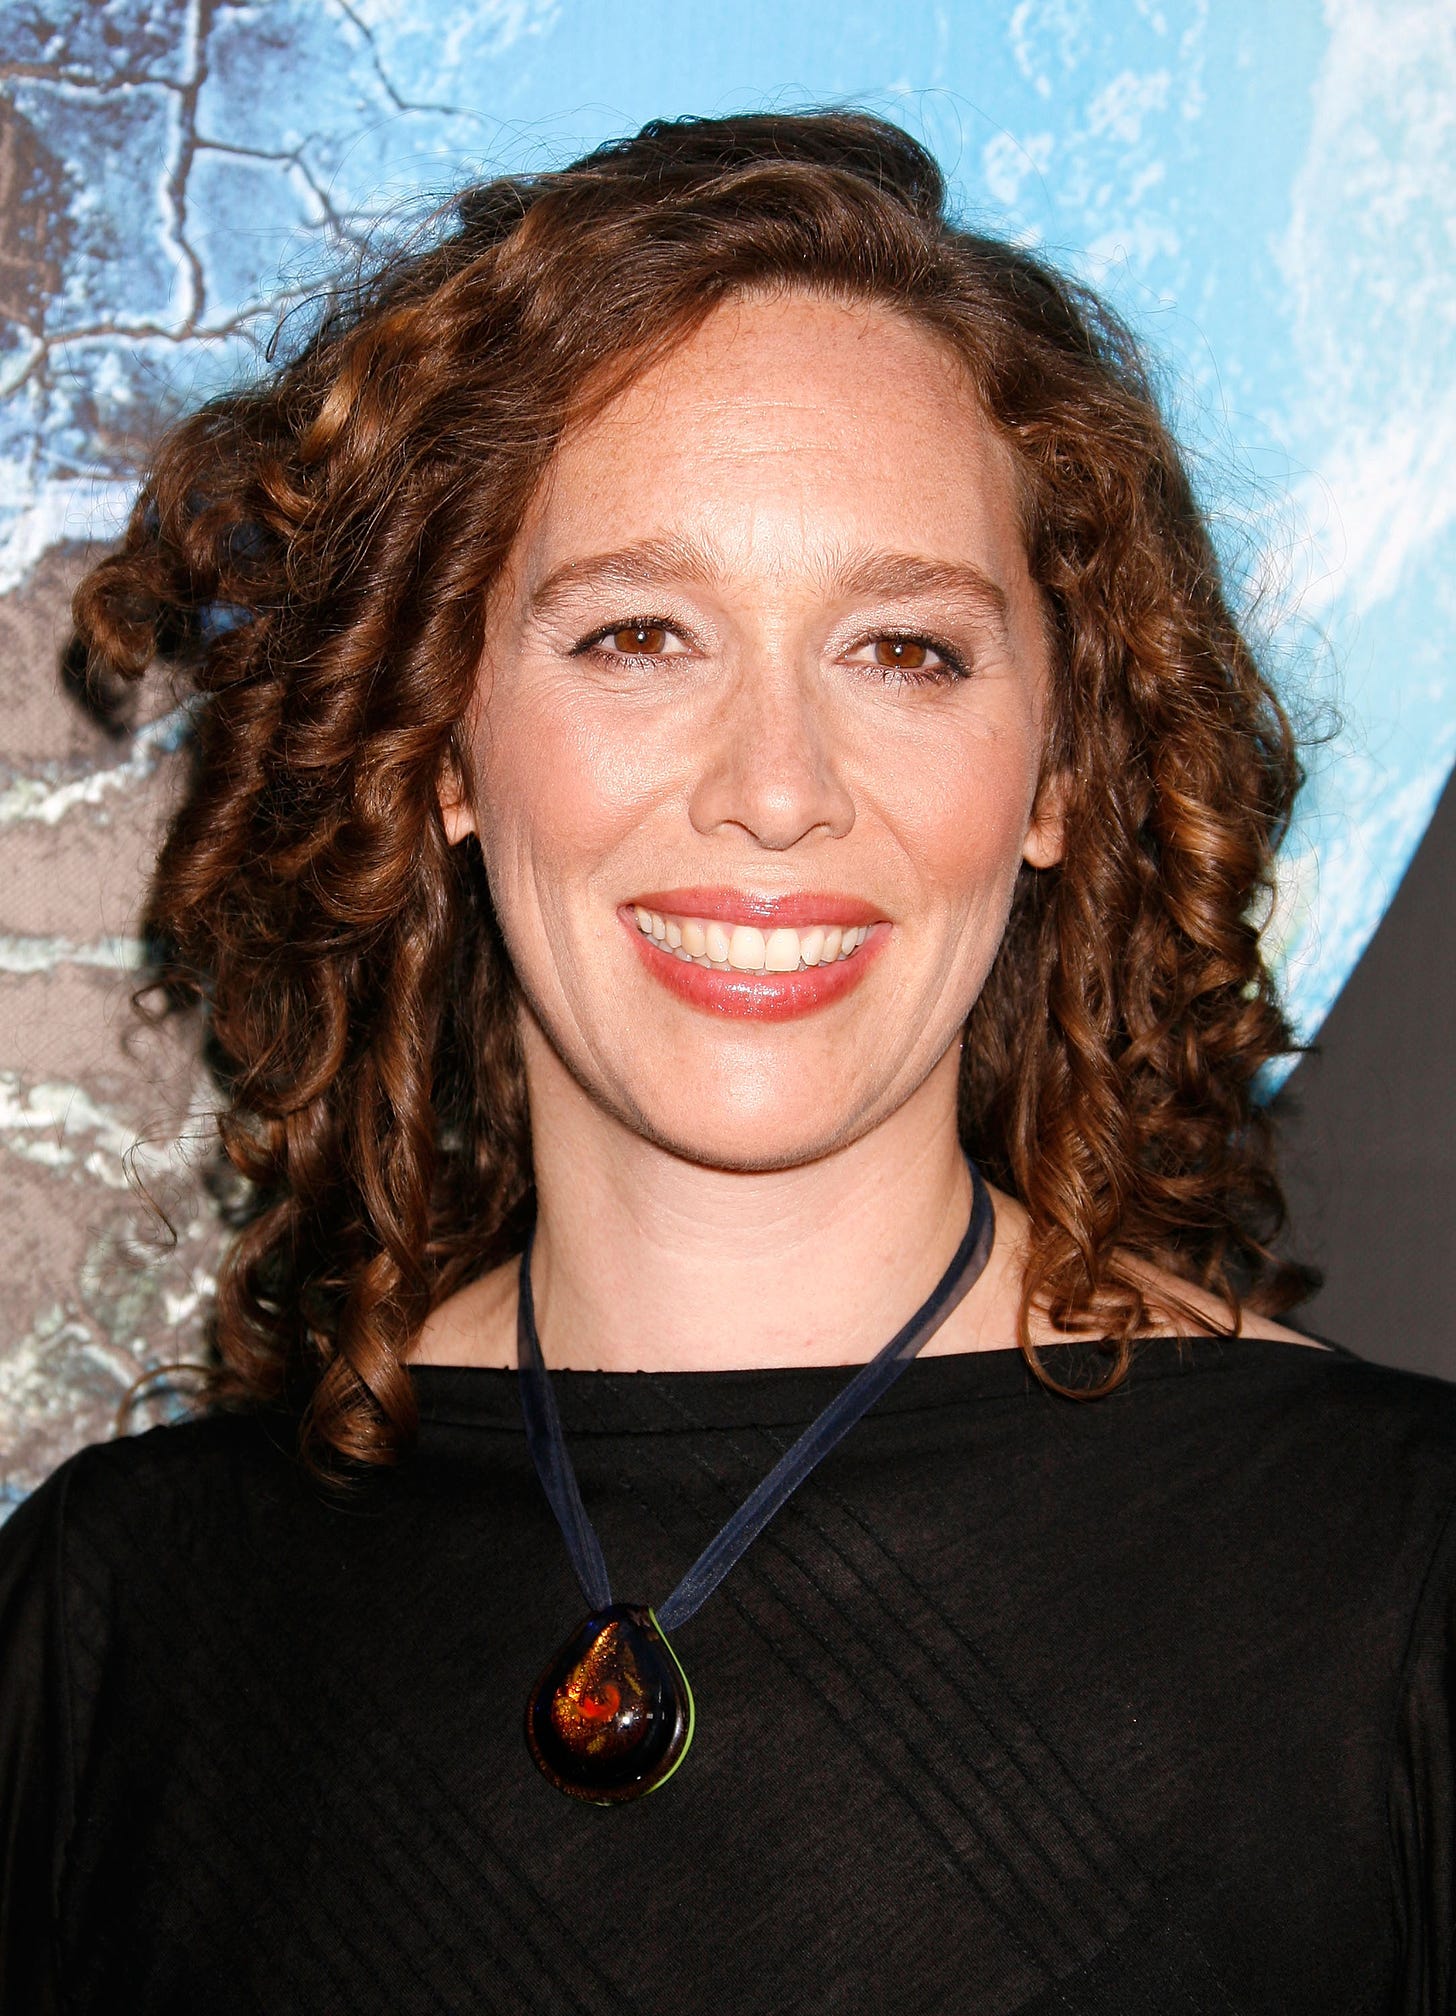 Tzeporah Berman at the Hollywood premiere of The 11th Hour, in which she was featured, on August 8, 2007. (Photo: Getty Images)